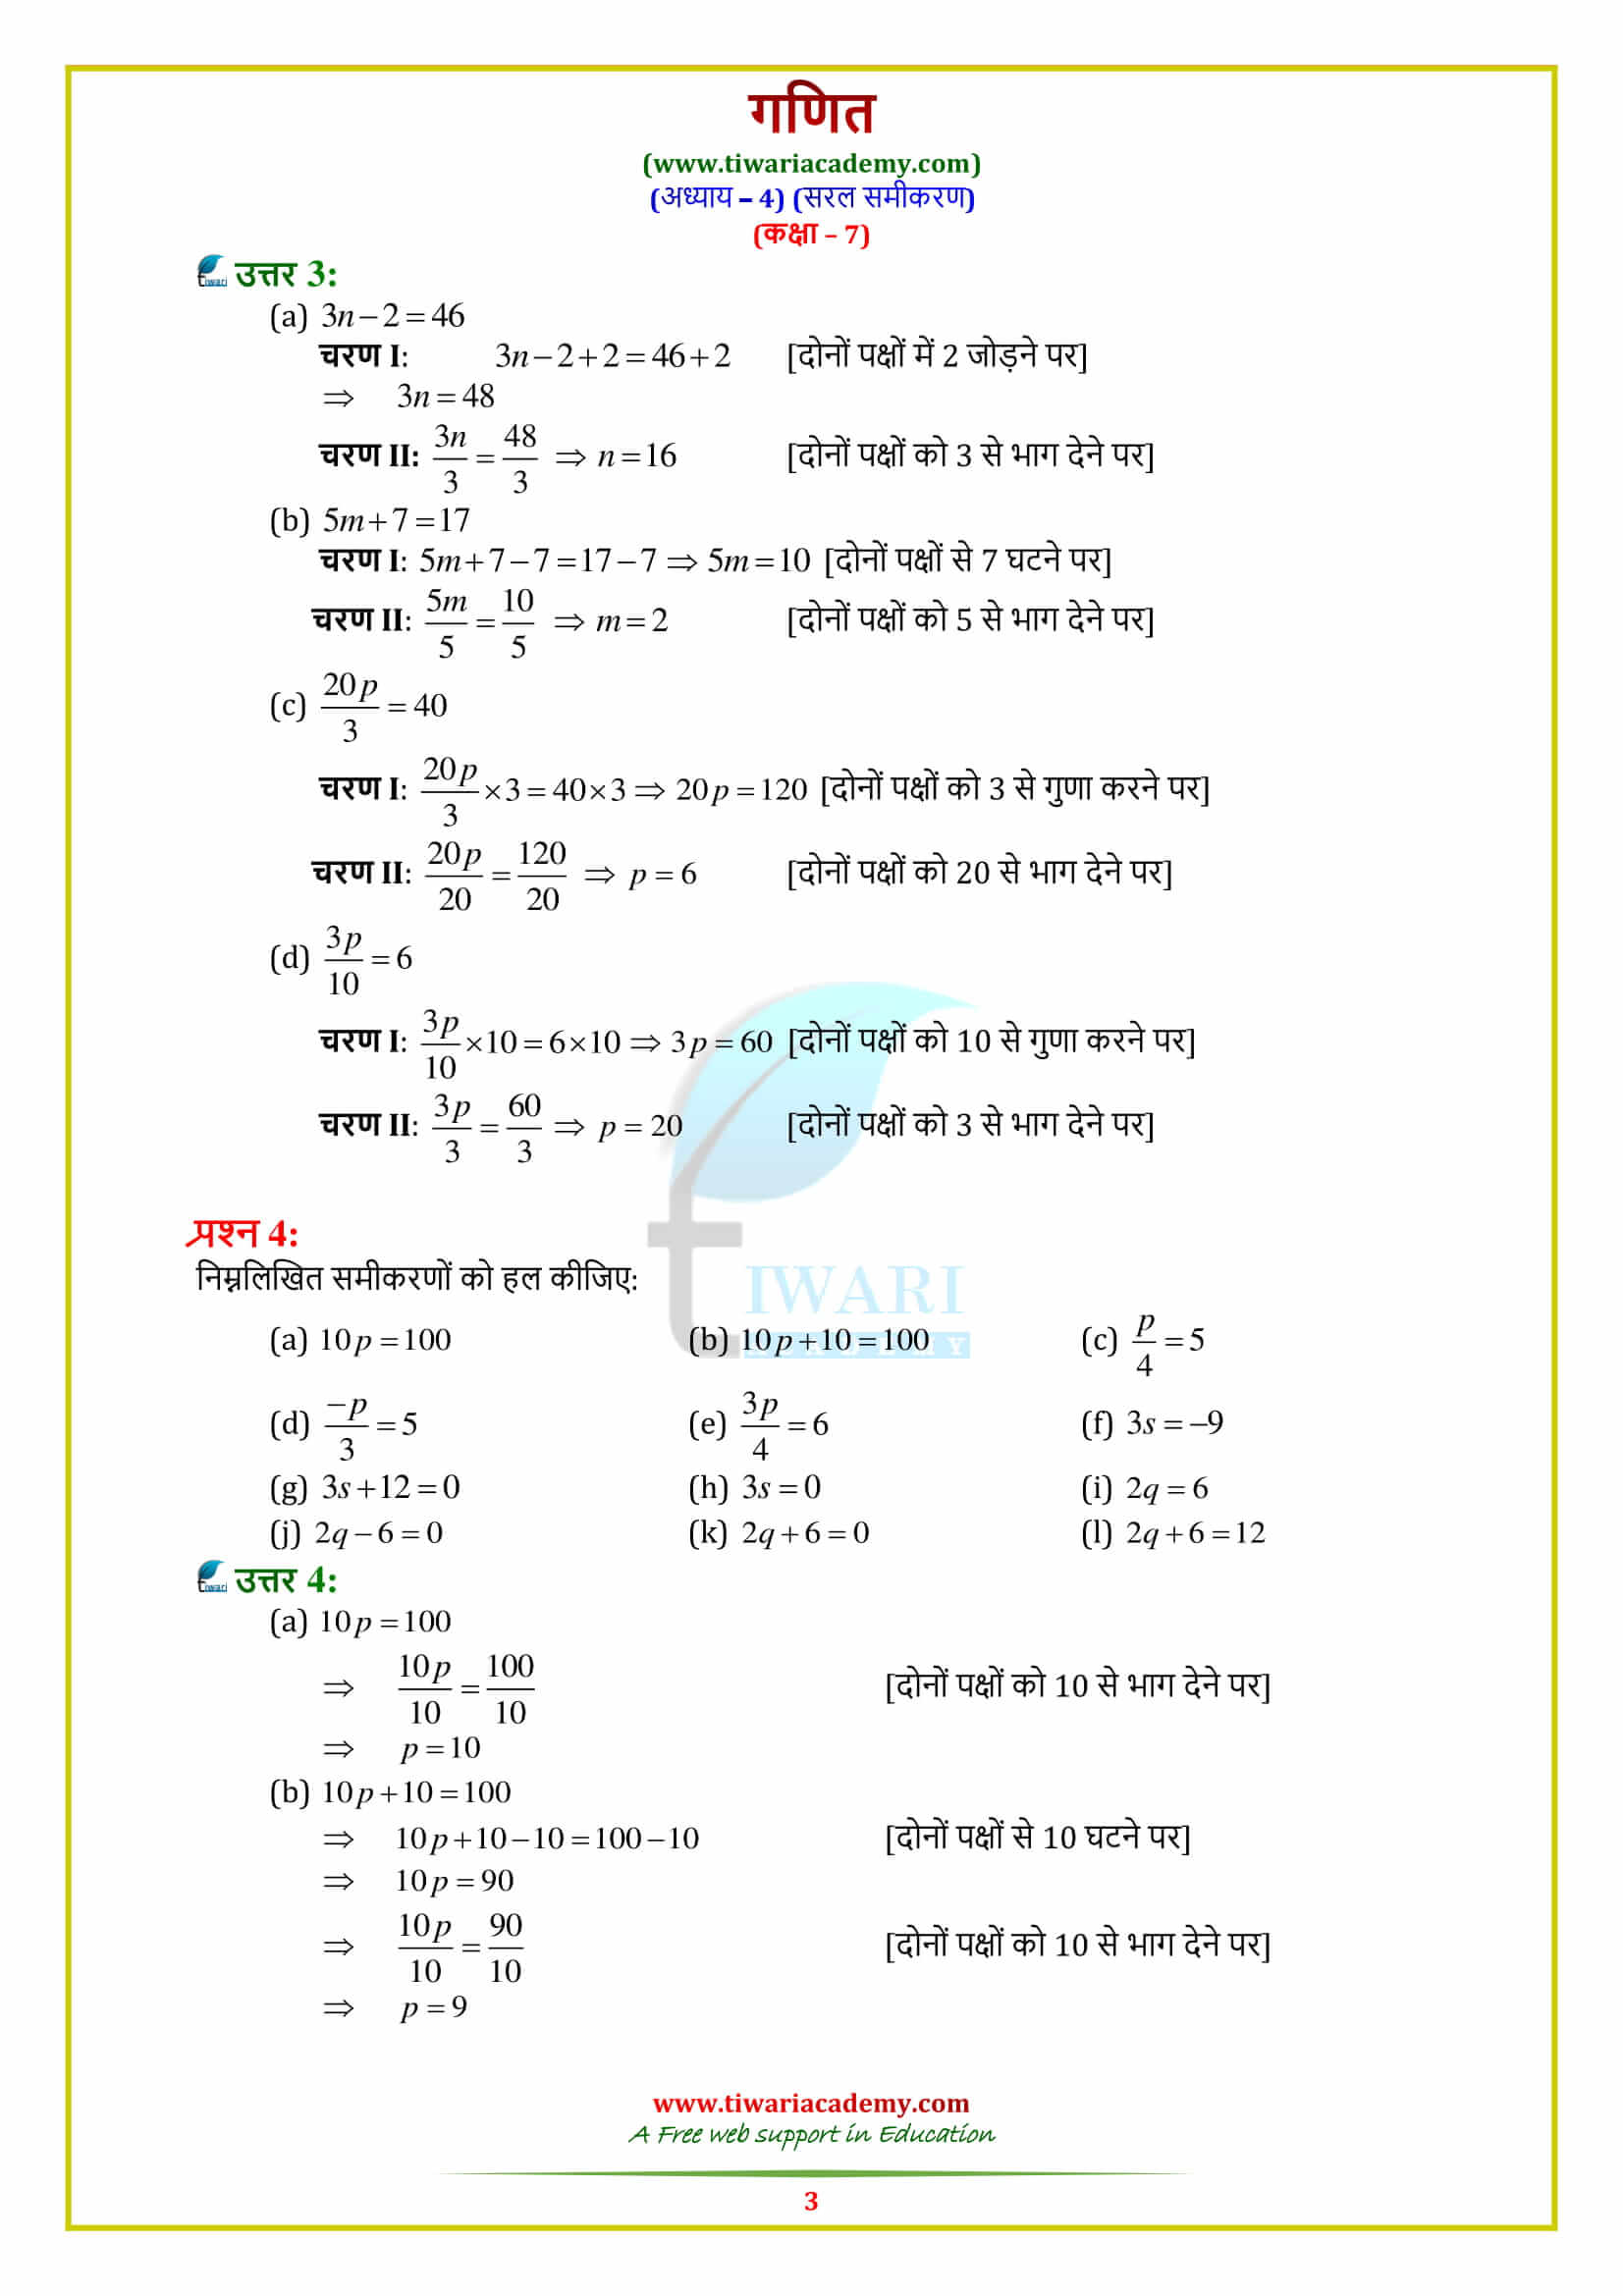 7 Maths Exercise 4.2 Solutions in hindi